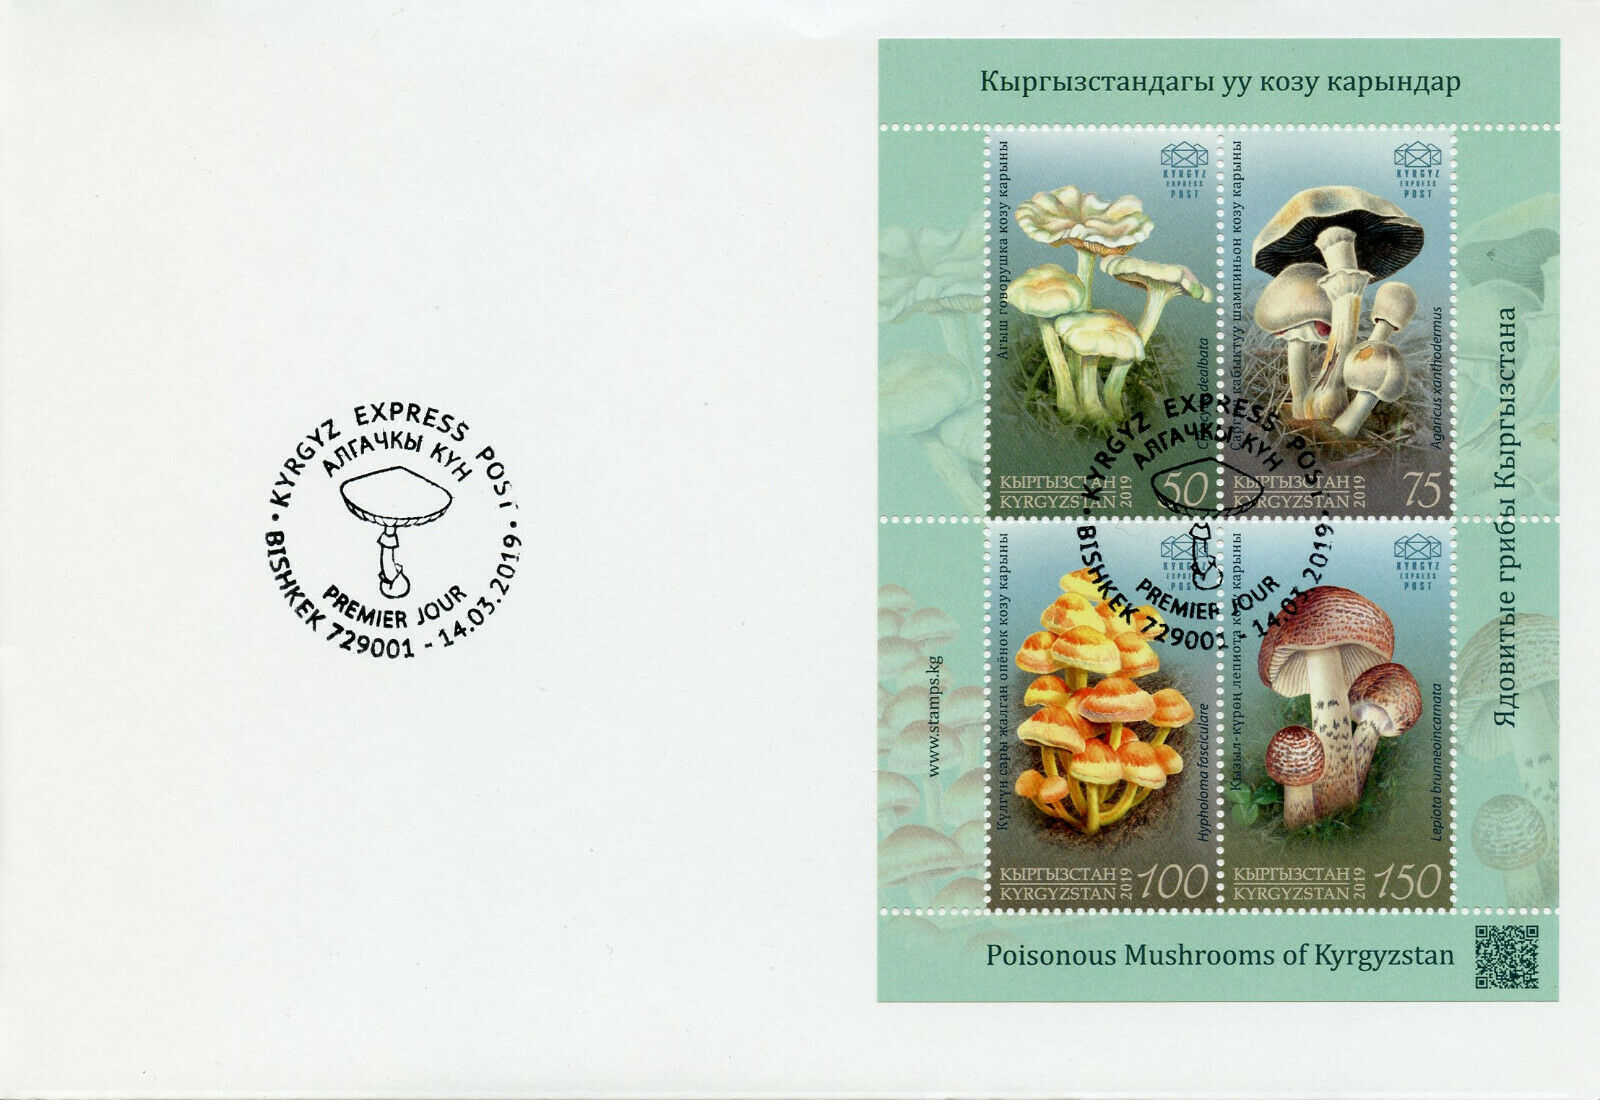 Kyrgyzstan KEP 2019 FDC Poisonous Mushrooms 4v M/S Cover Fungi Nature Stamps